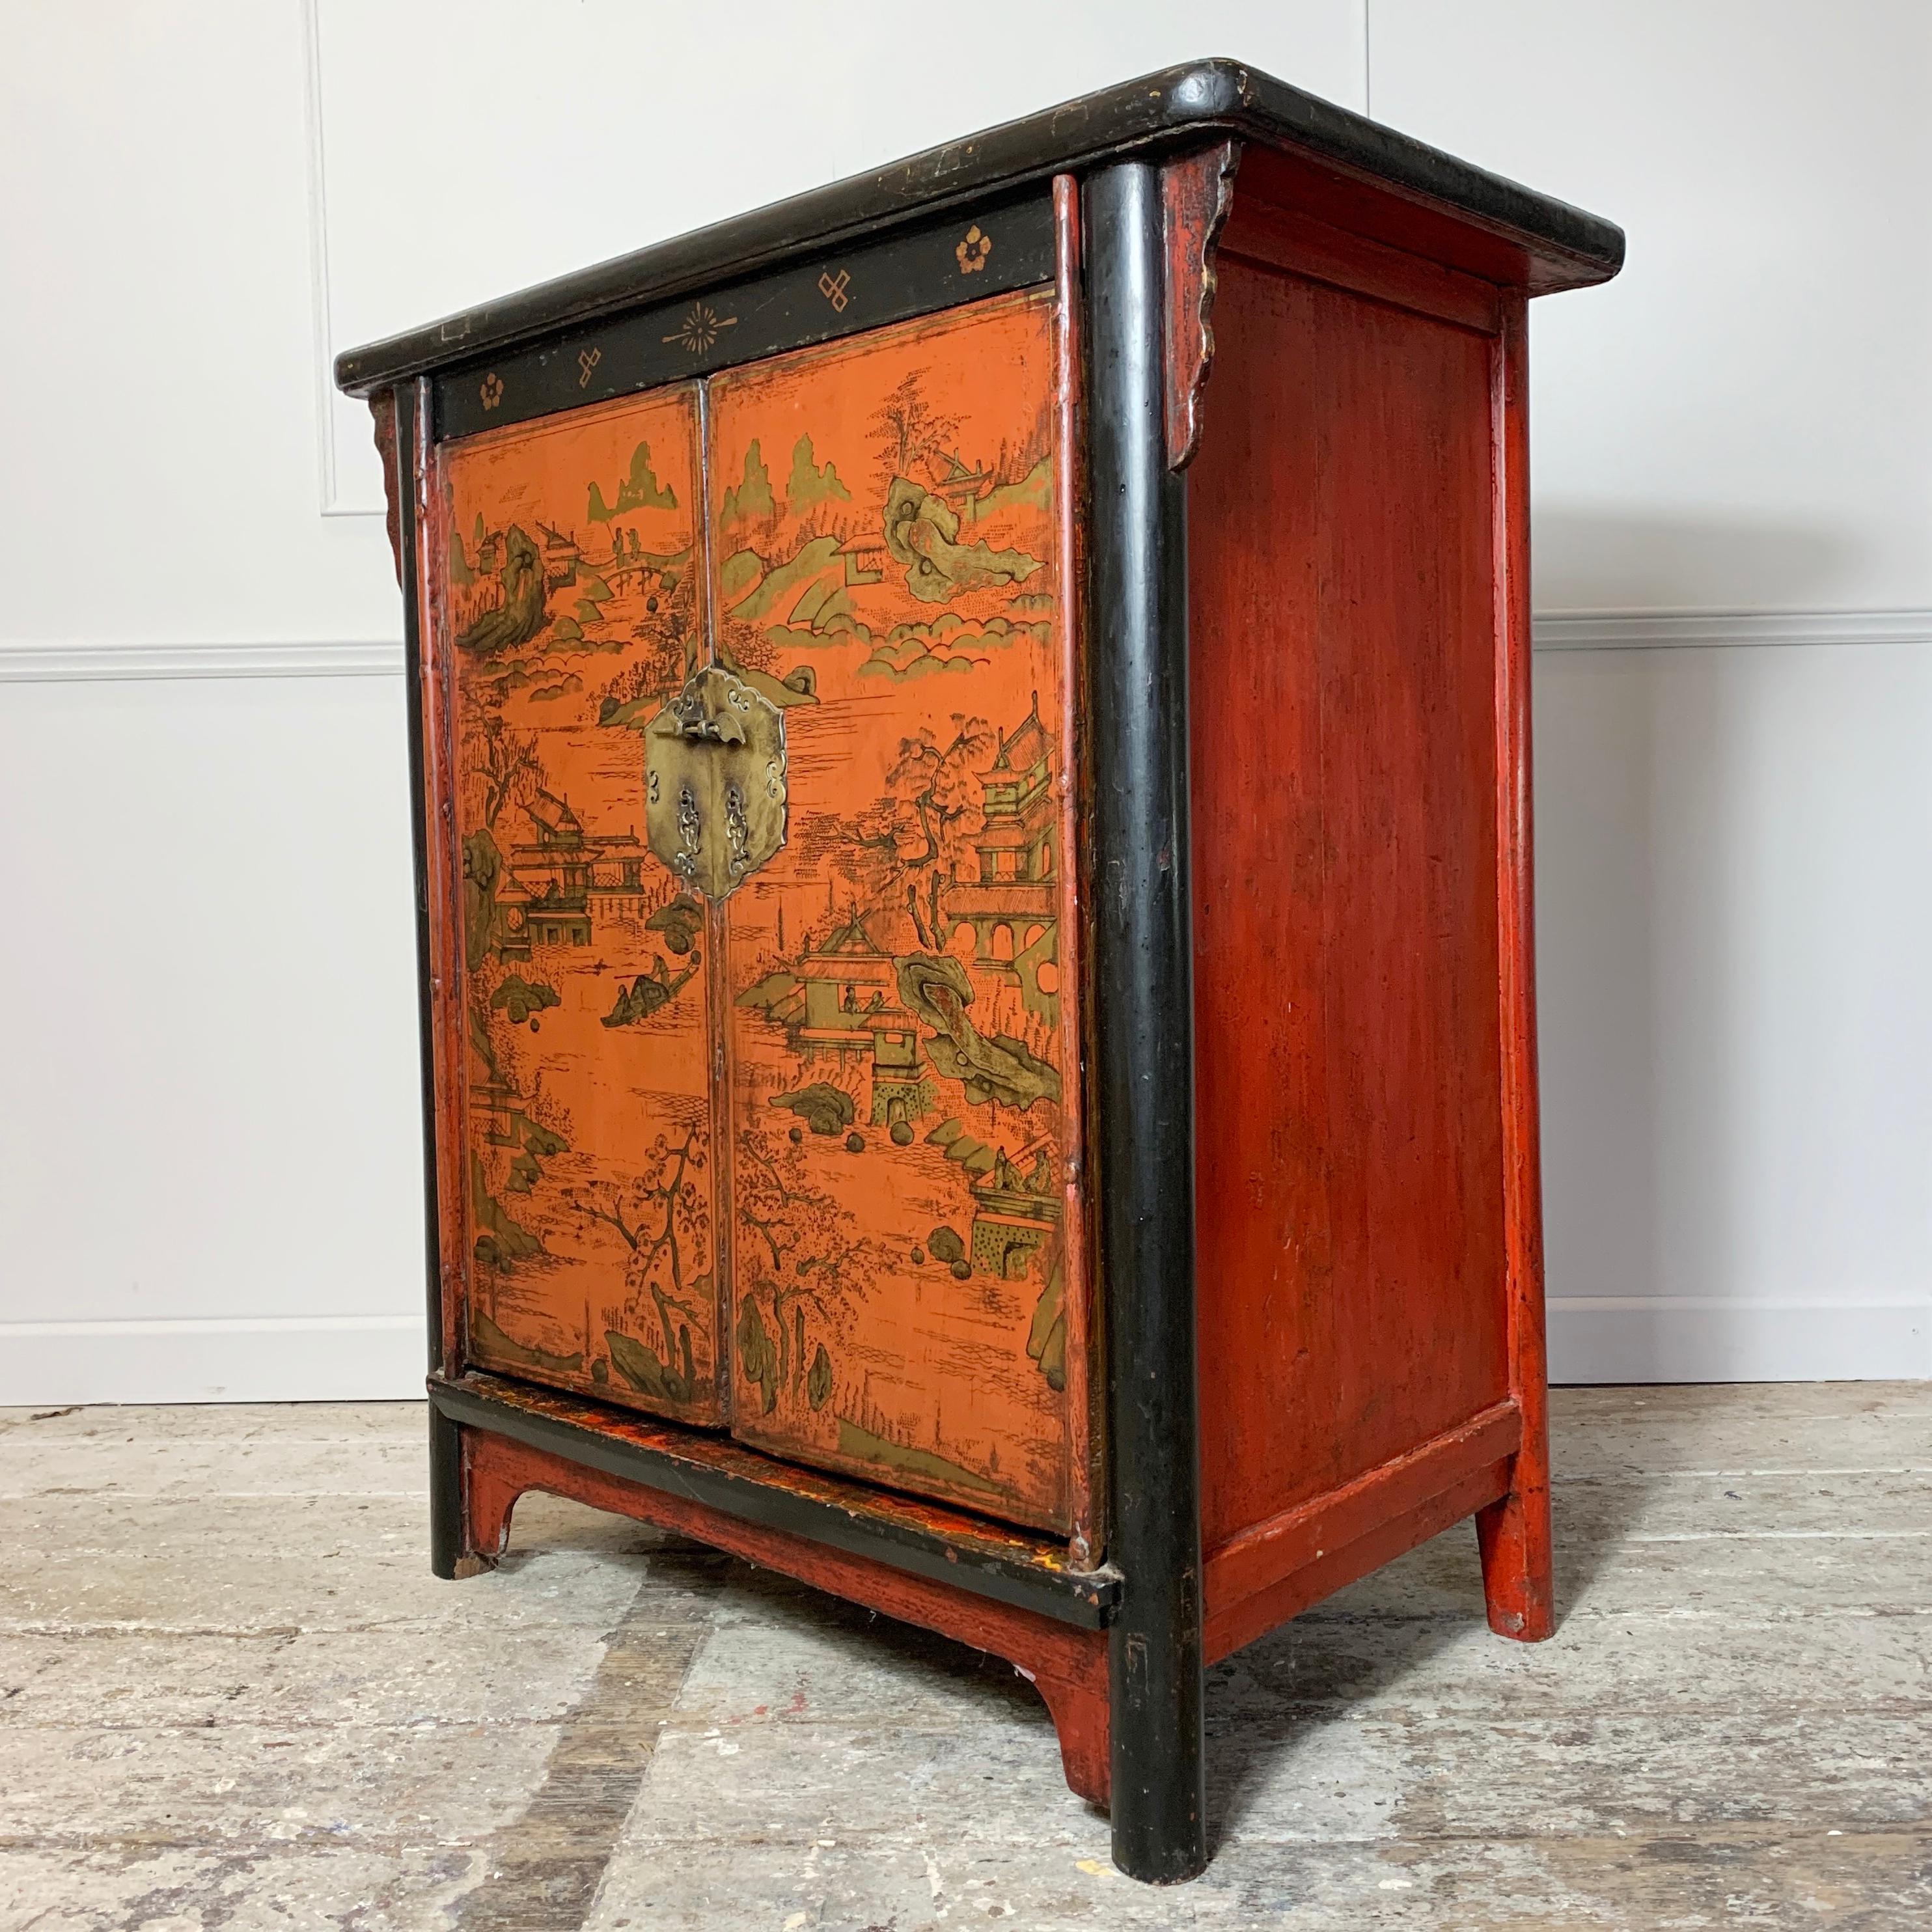 19th century crimson red on black chinoiserie cabinet
Original paintwork
The door, decorated with oriental landscapes and figures in gilt, opens to reveal a shelved interior

Dating from the latter half of the 19th century

Original brass locking